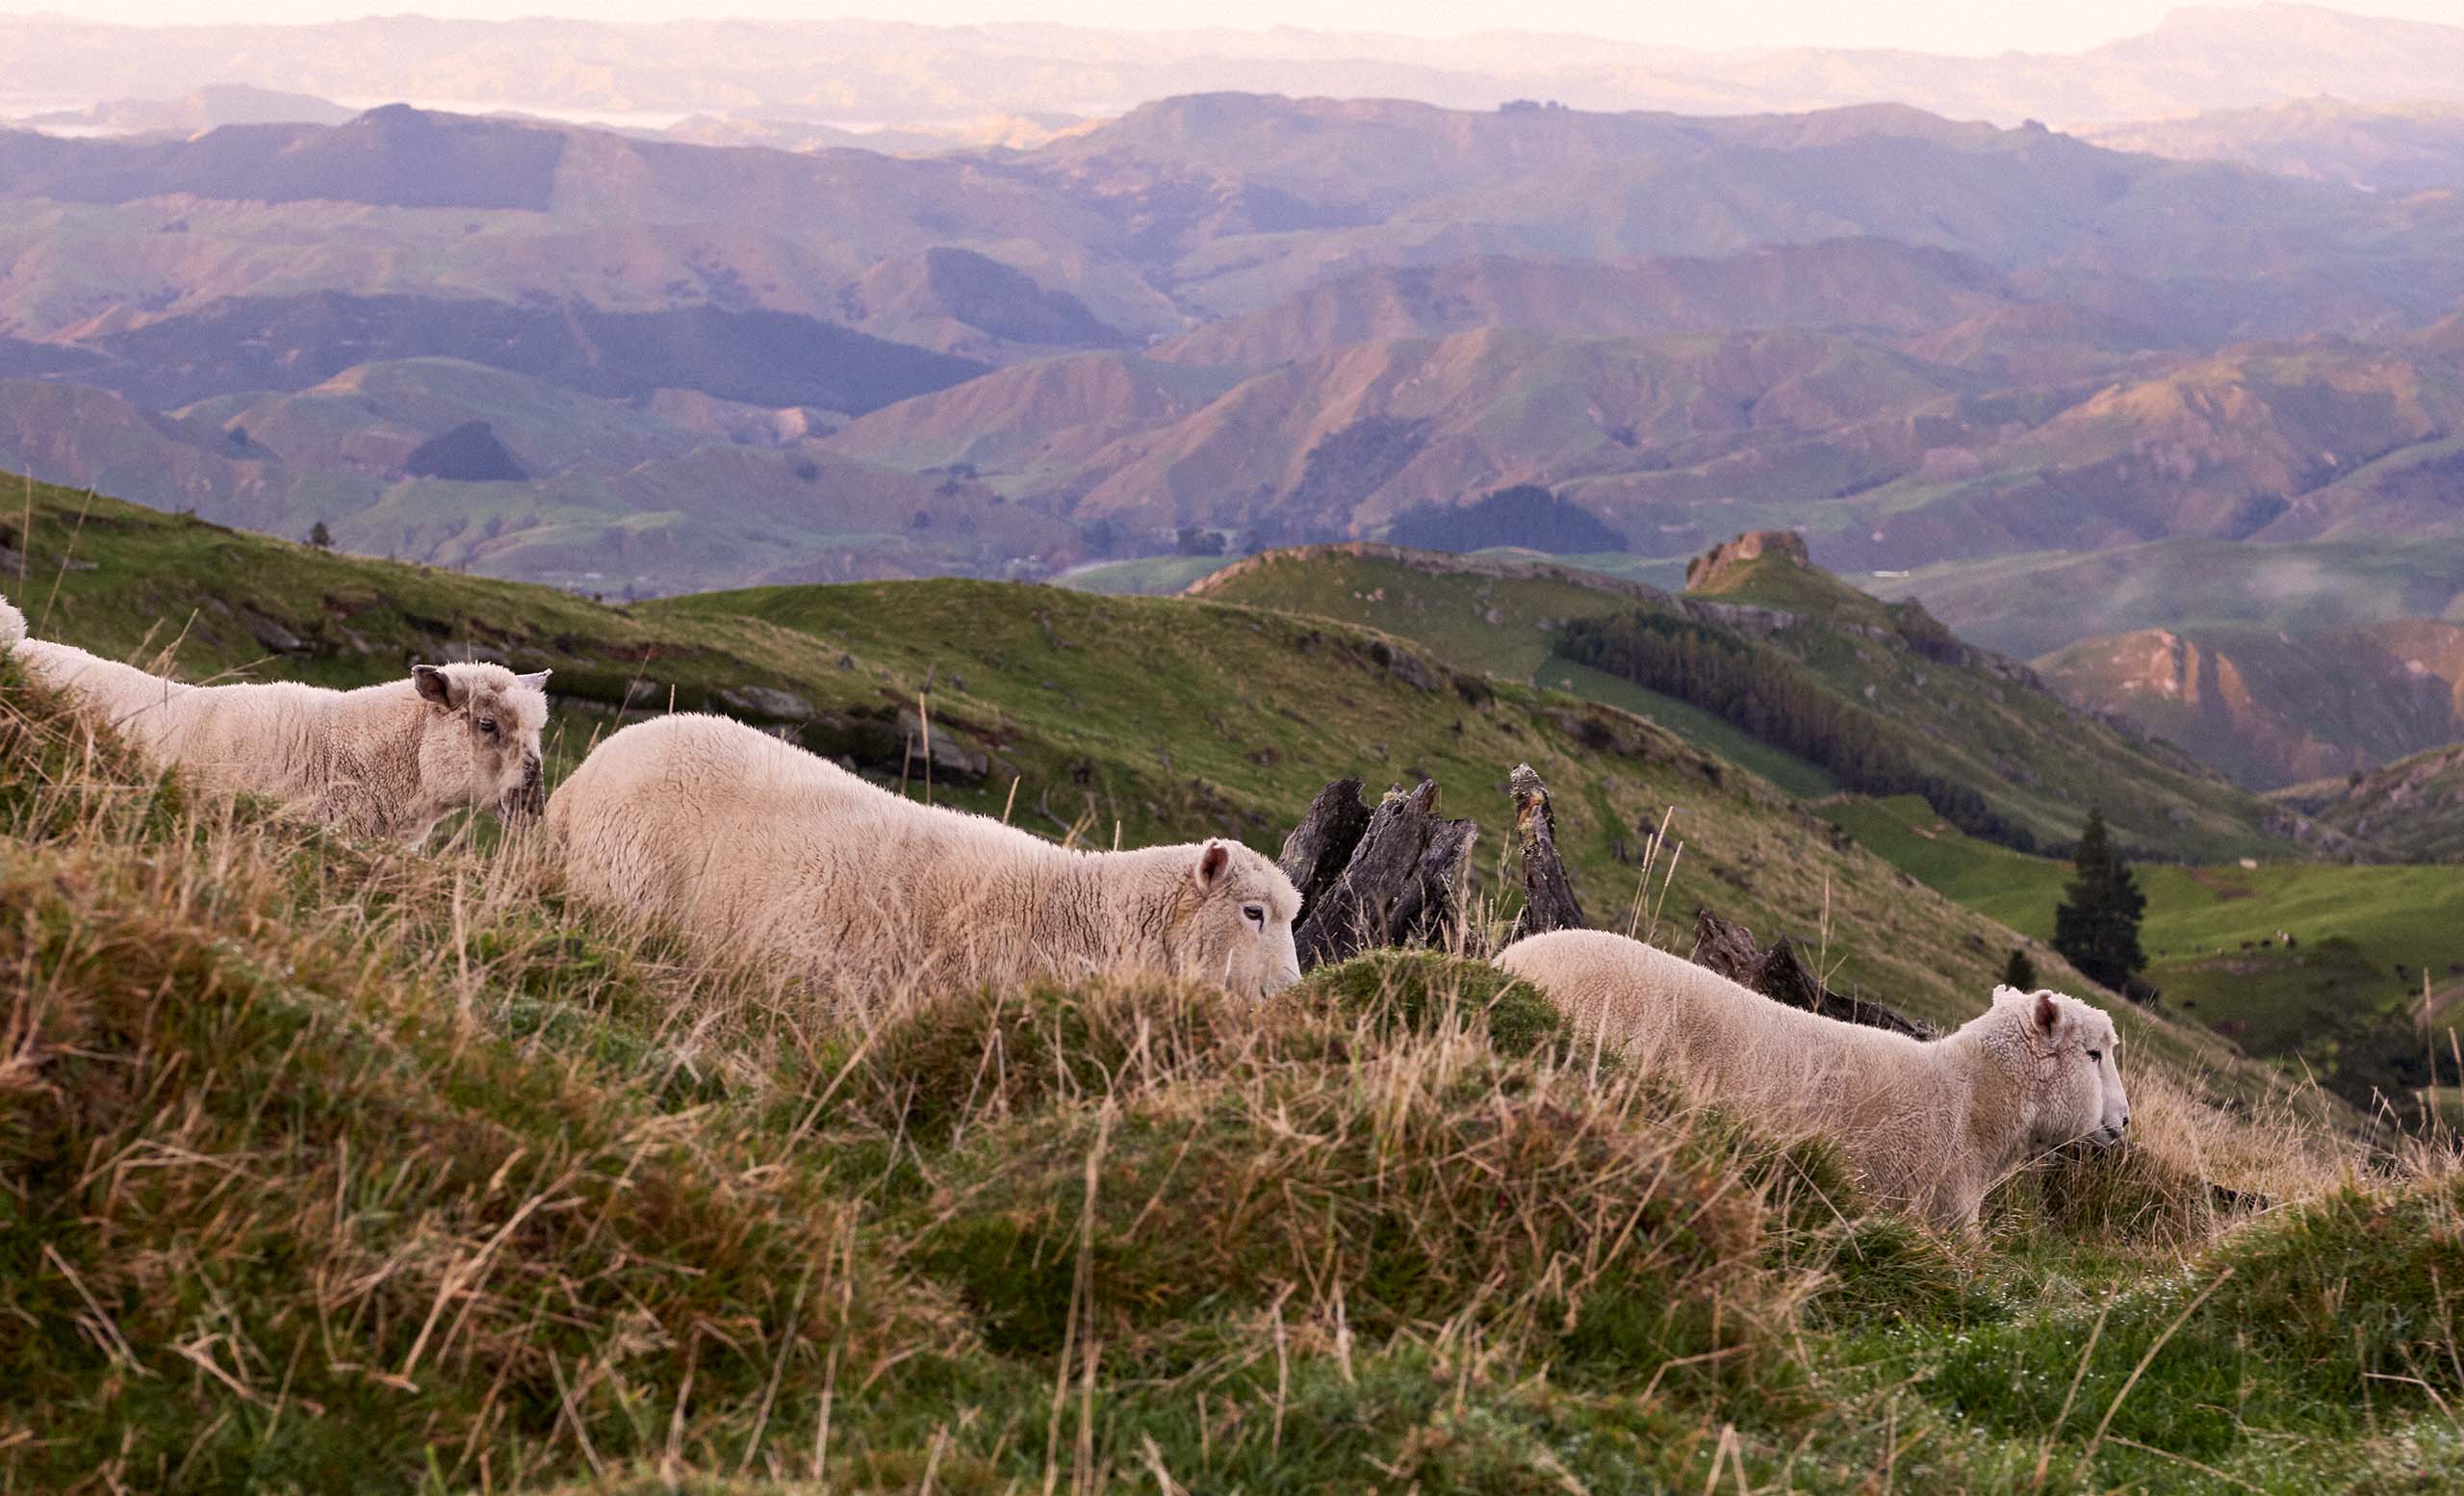 A flock of sheep roaming lush grass hills in New Zealand